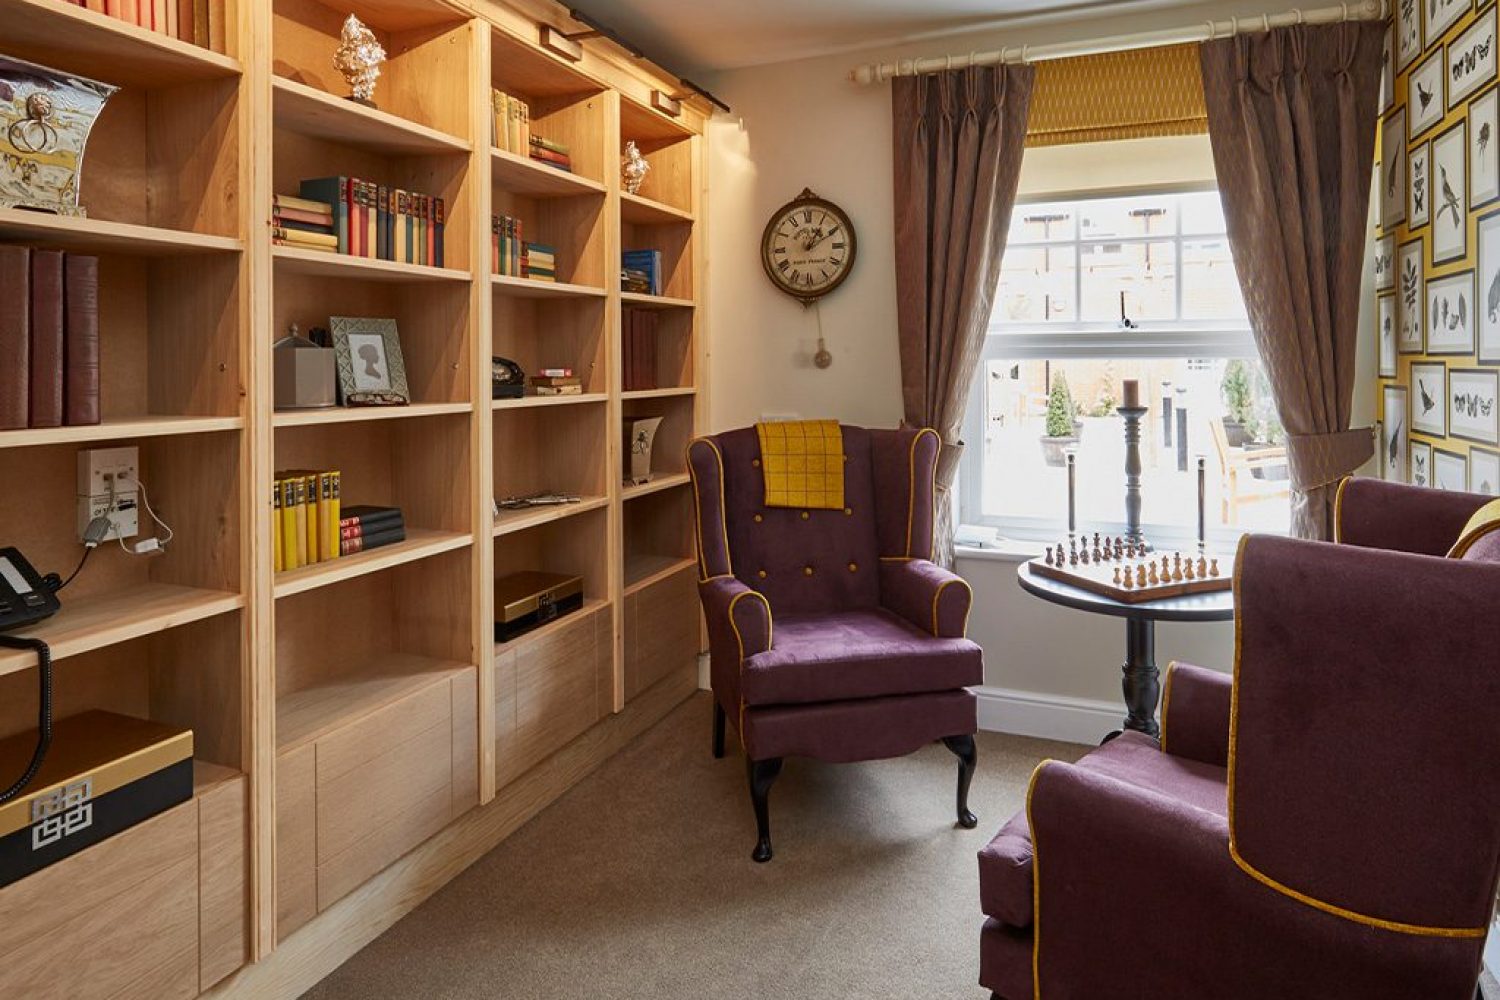 Care Home Furniture Tips From Furncare